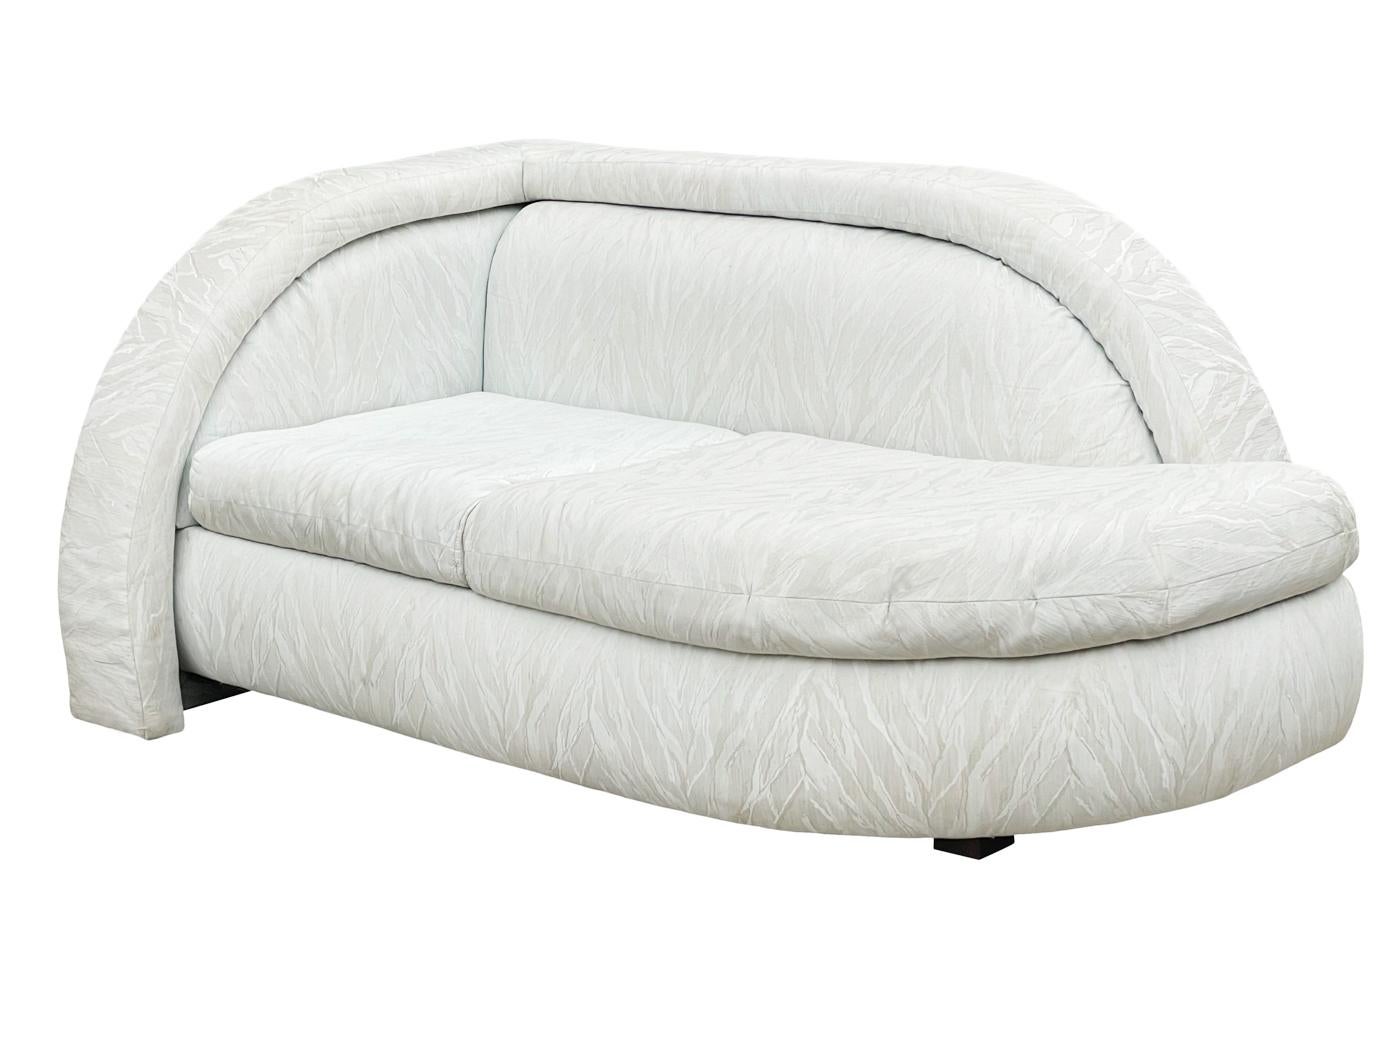 Fabric Matching Pair of Hollywood Regency Love Seats or Chaise Lounges in White For Sale